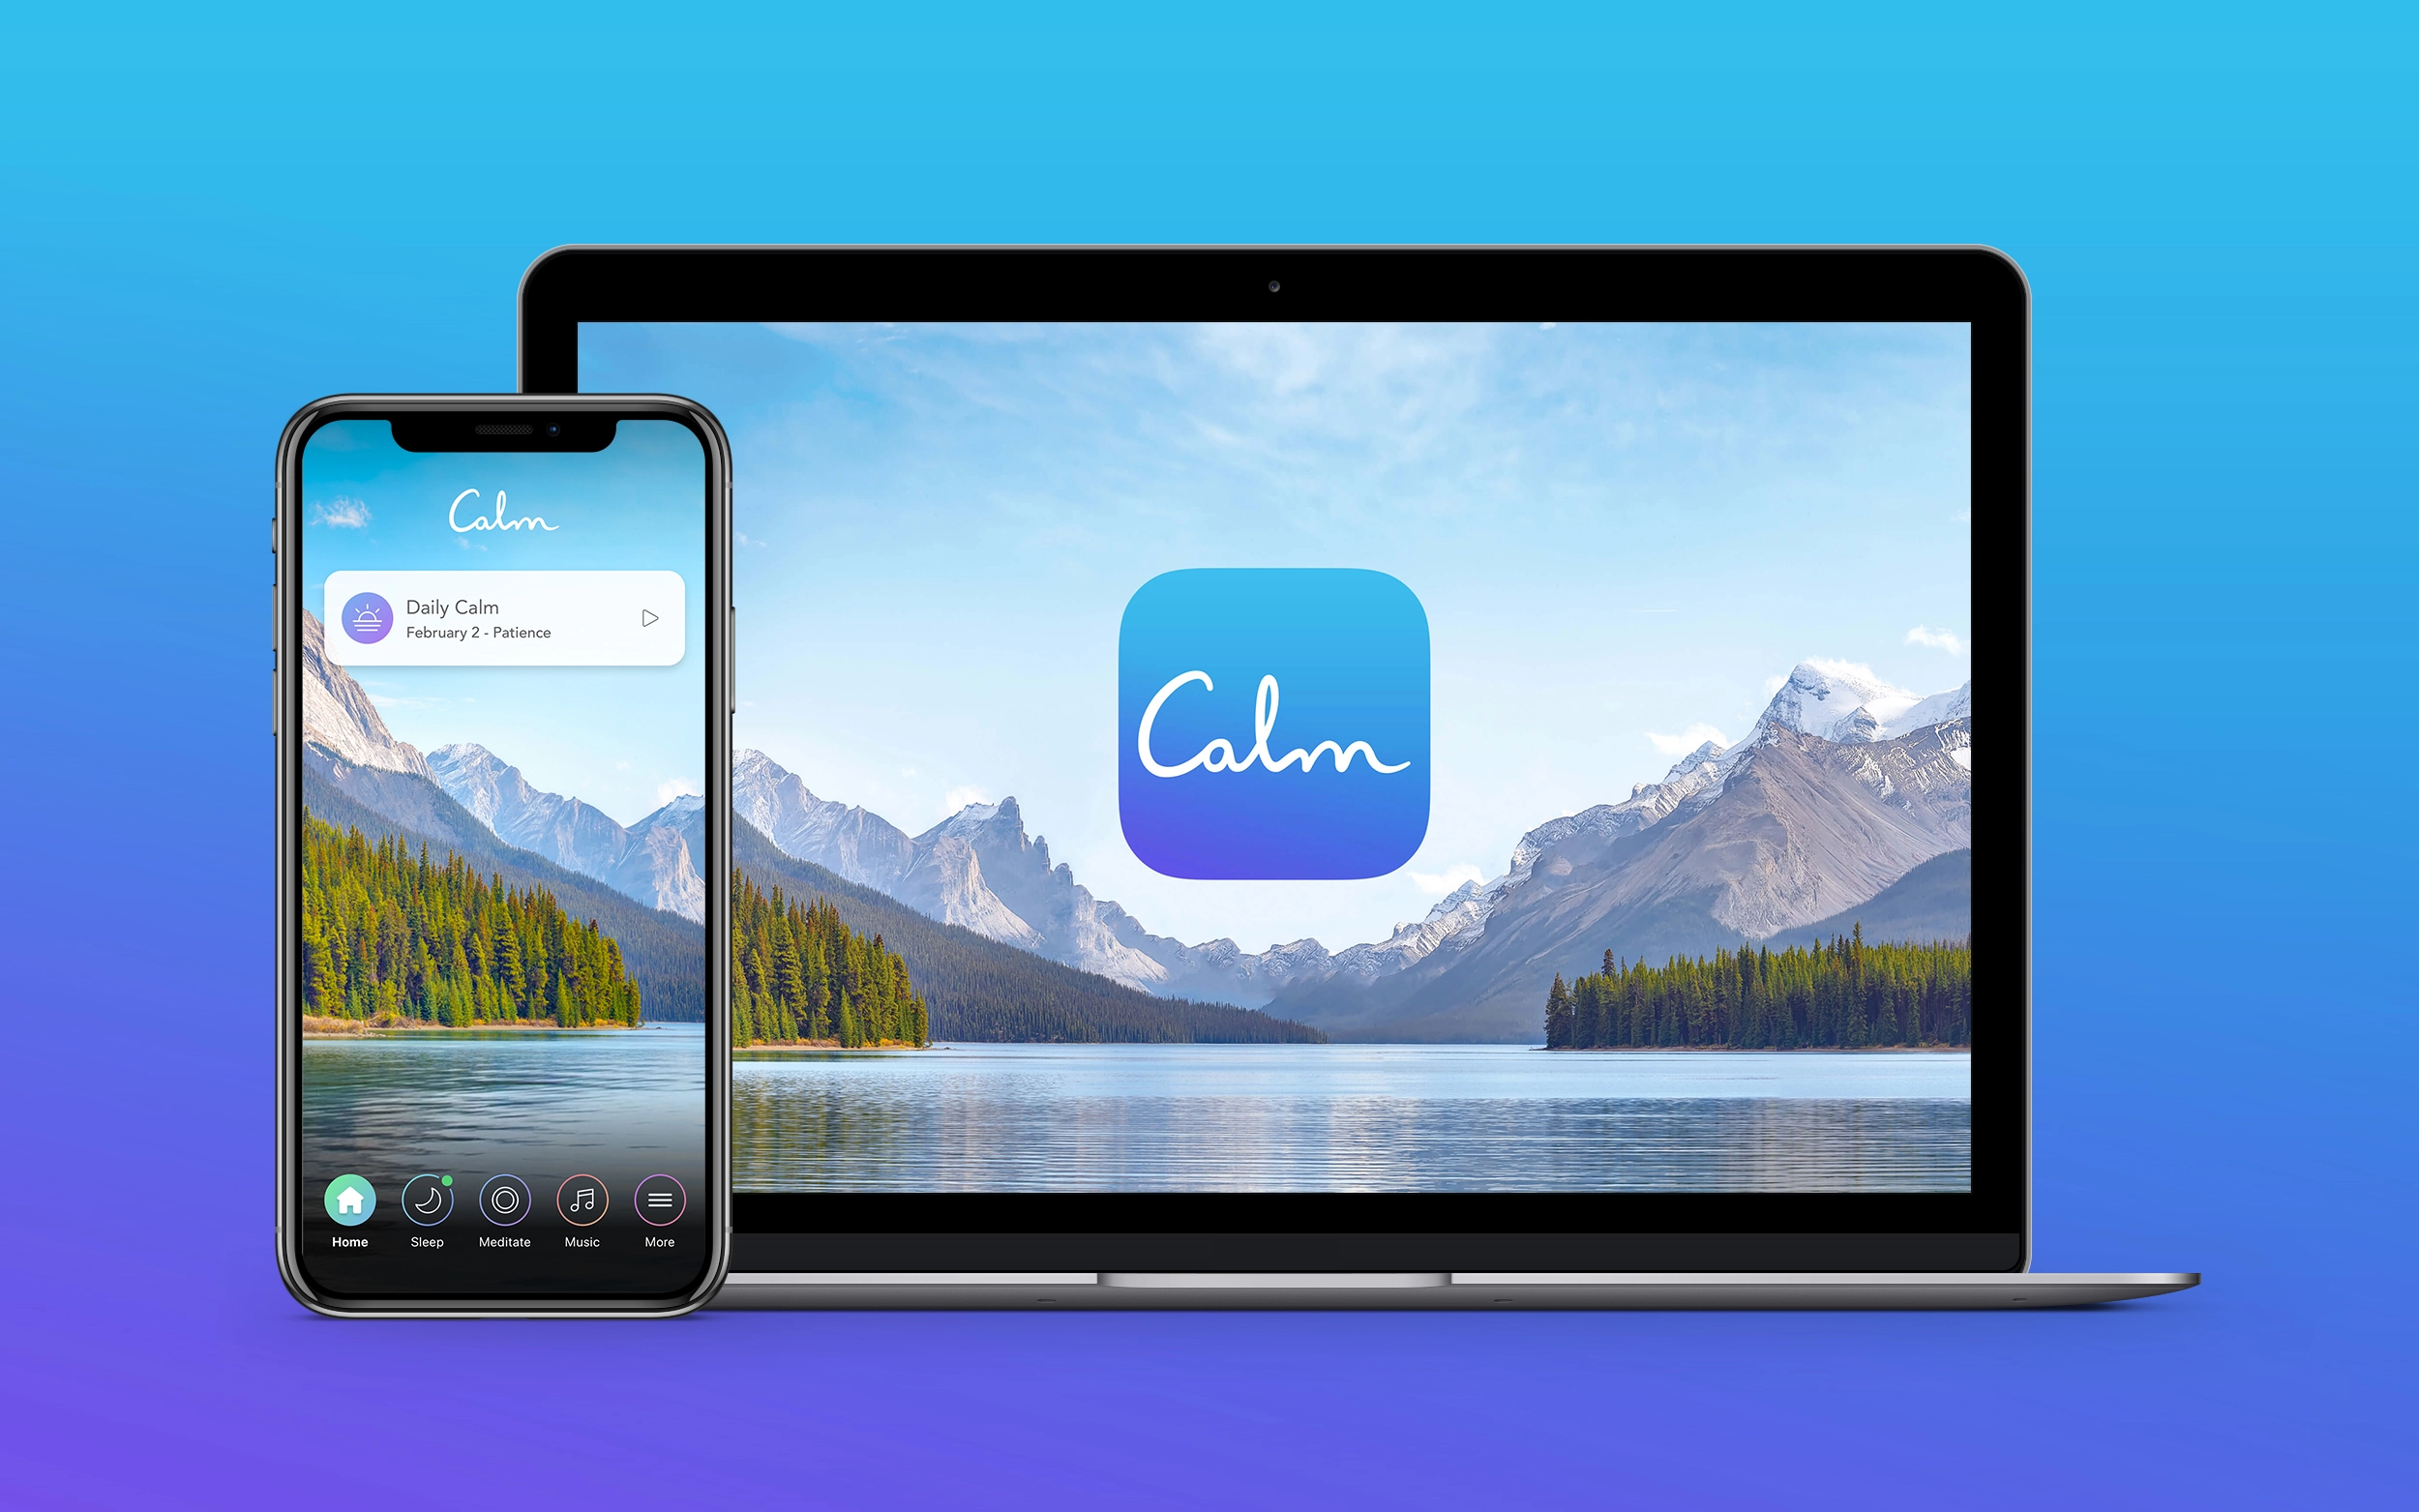 Calm Premium - 3 Months Trial Subscription Key (ONLY FOR NEW ACCOUNTS) 0.8 $